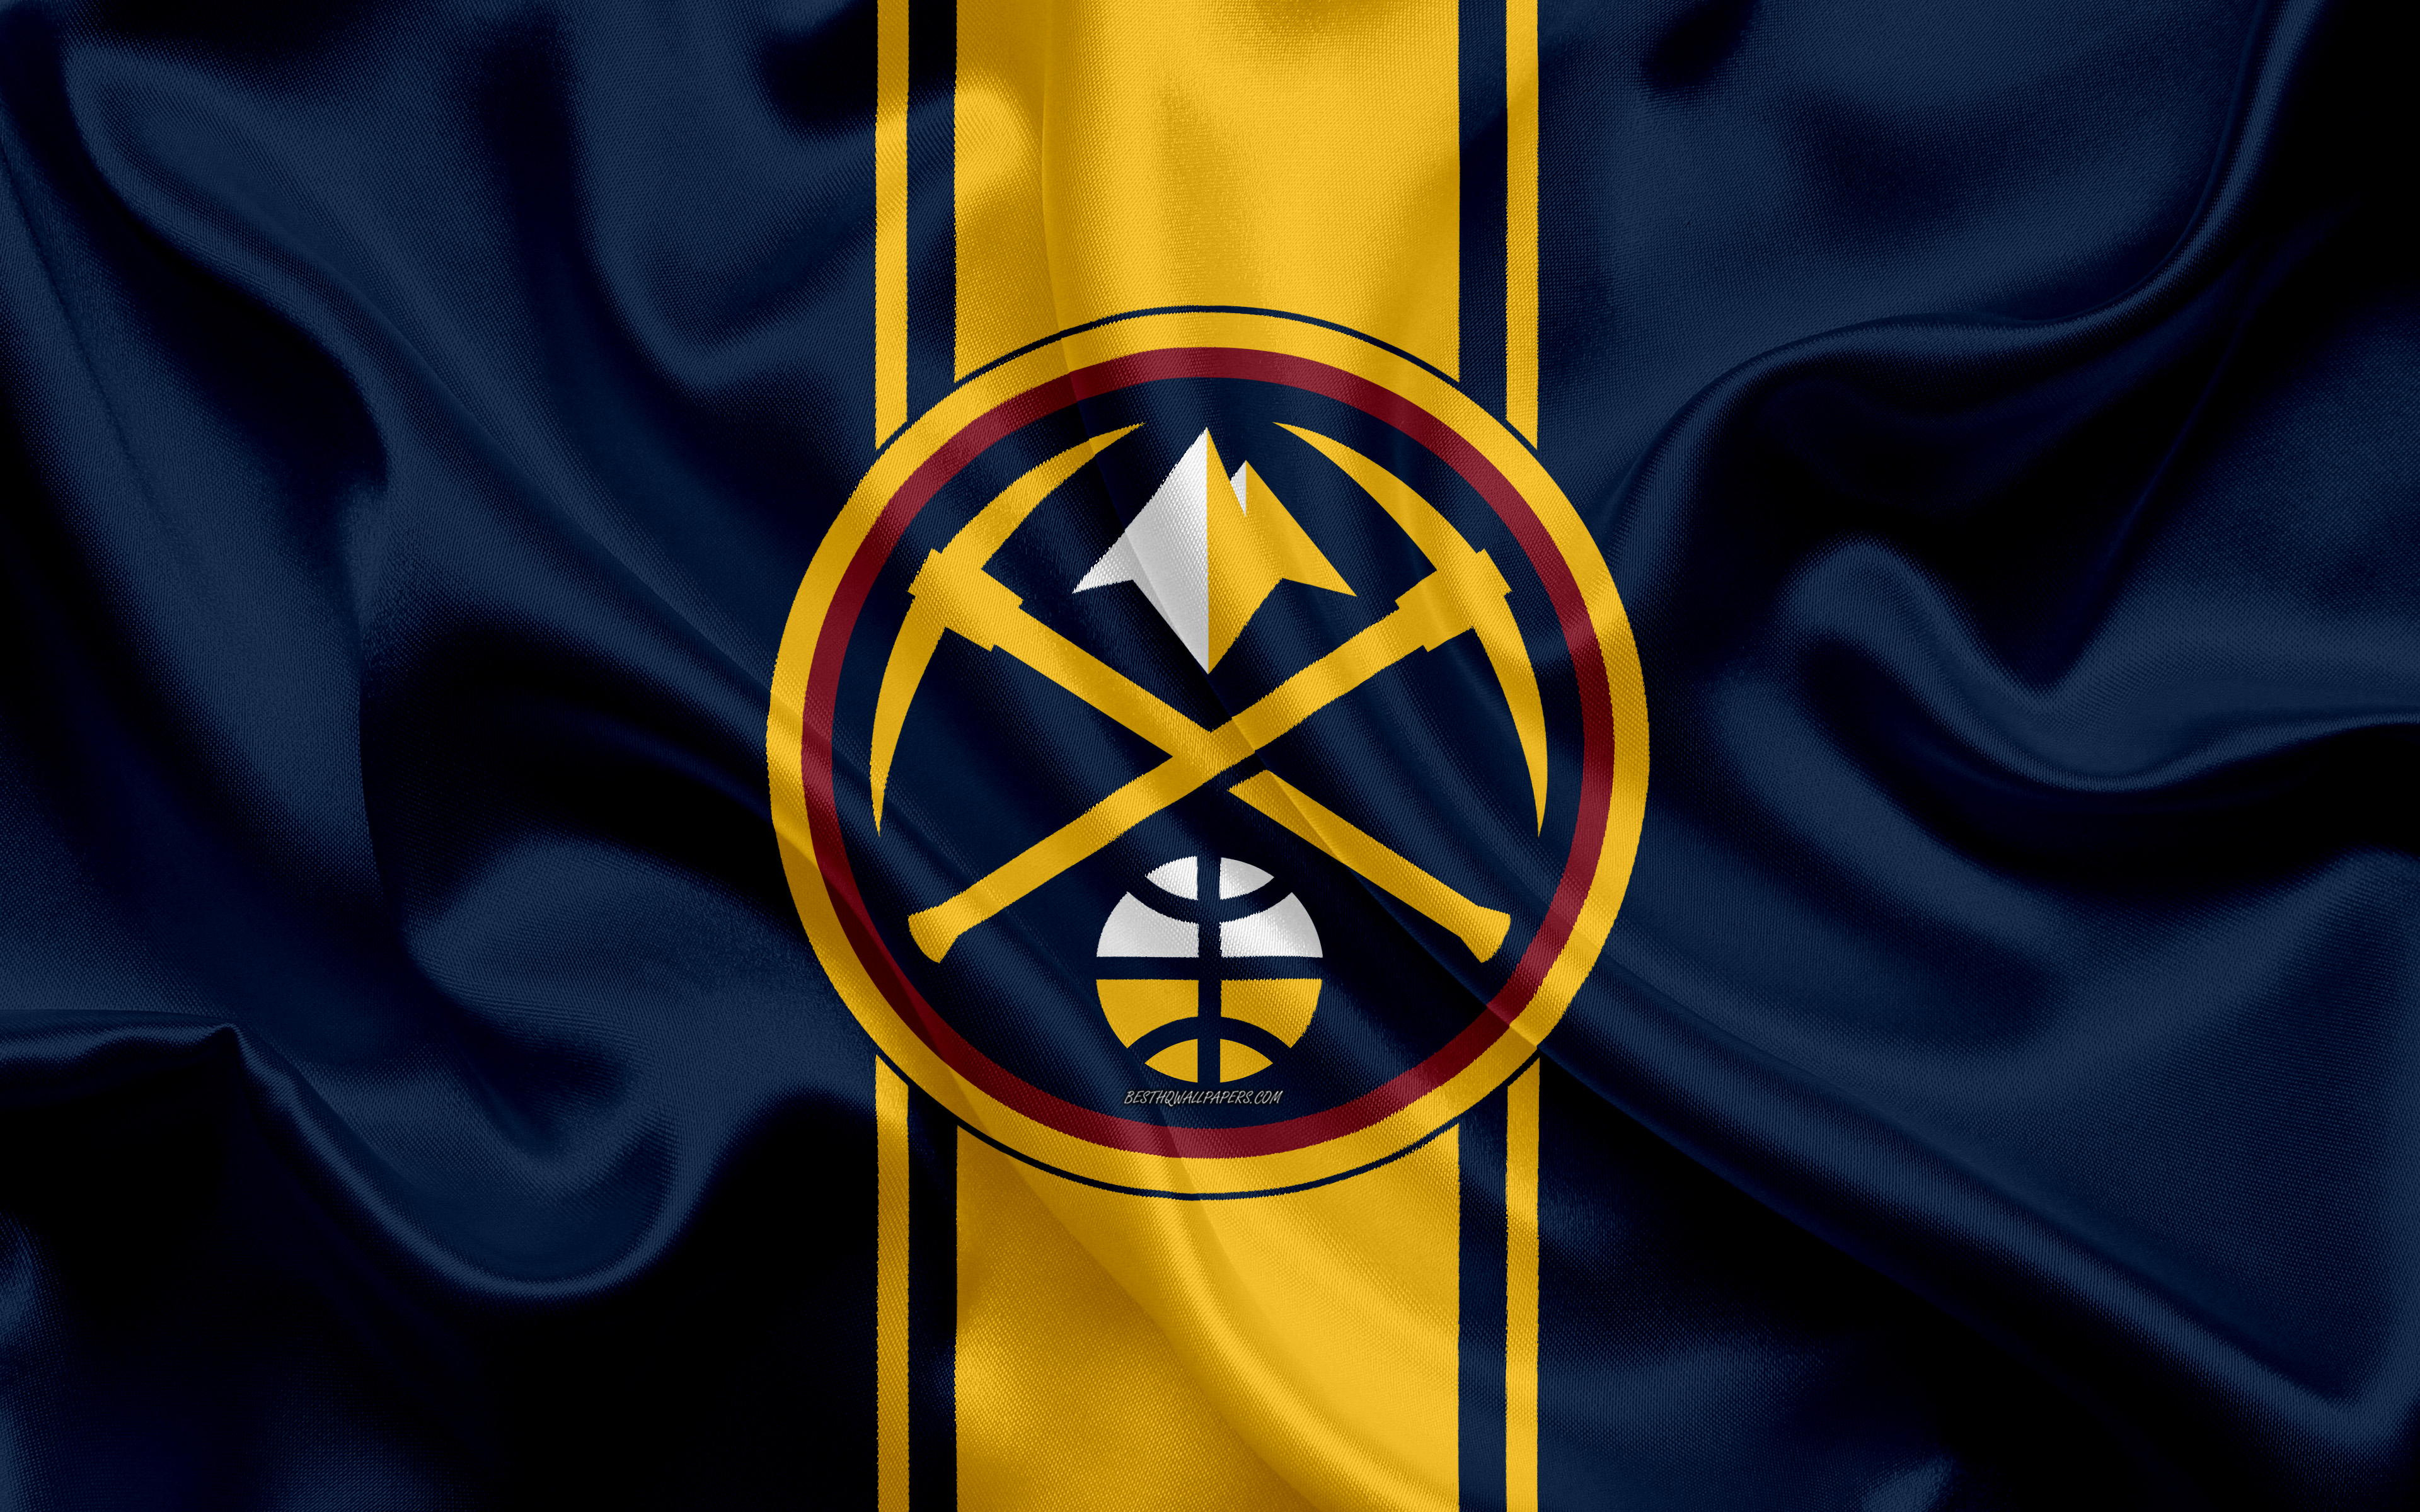 Download Denver Nuggets wallpapers for mobile phone, free